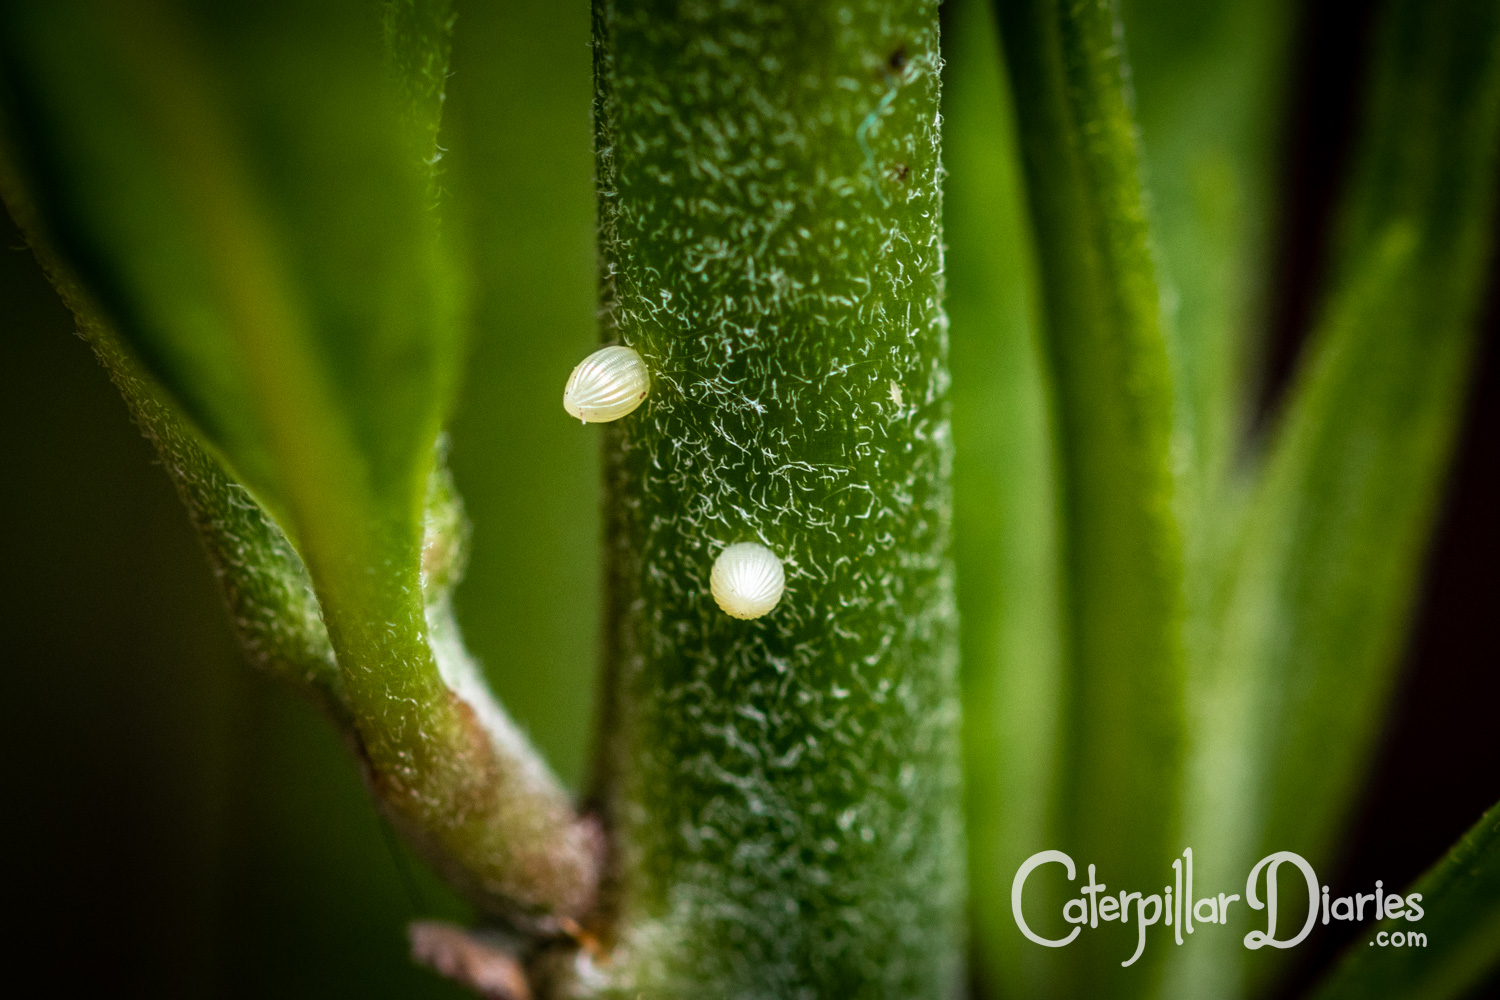 Two monarch butterfly eggs on the stem of a swan plant, in close-up so that details on the surface of the eggs and plant are visible.